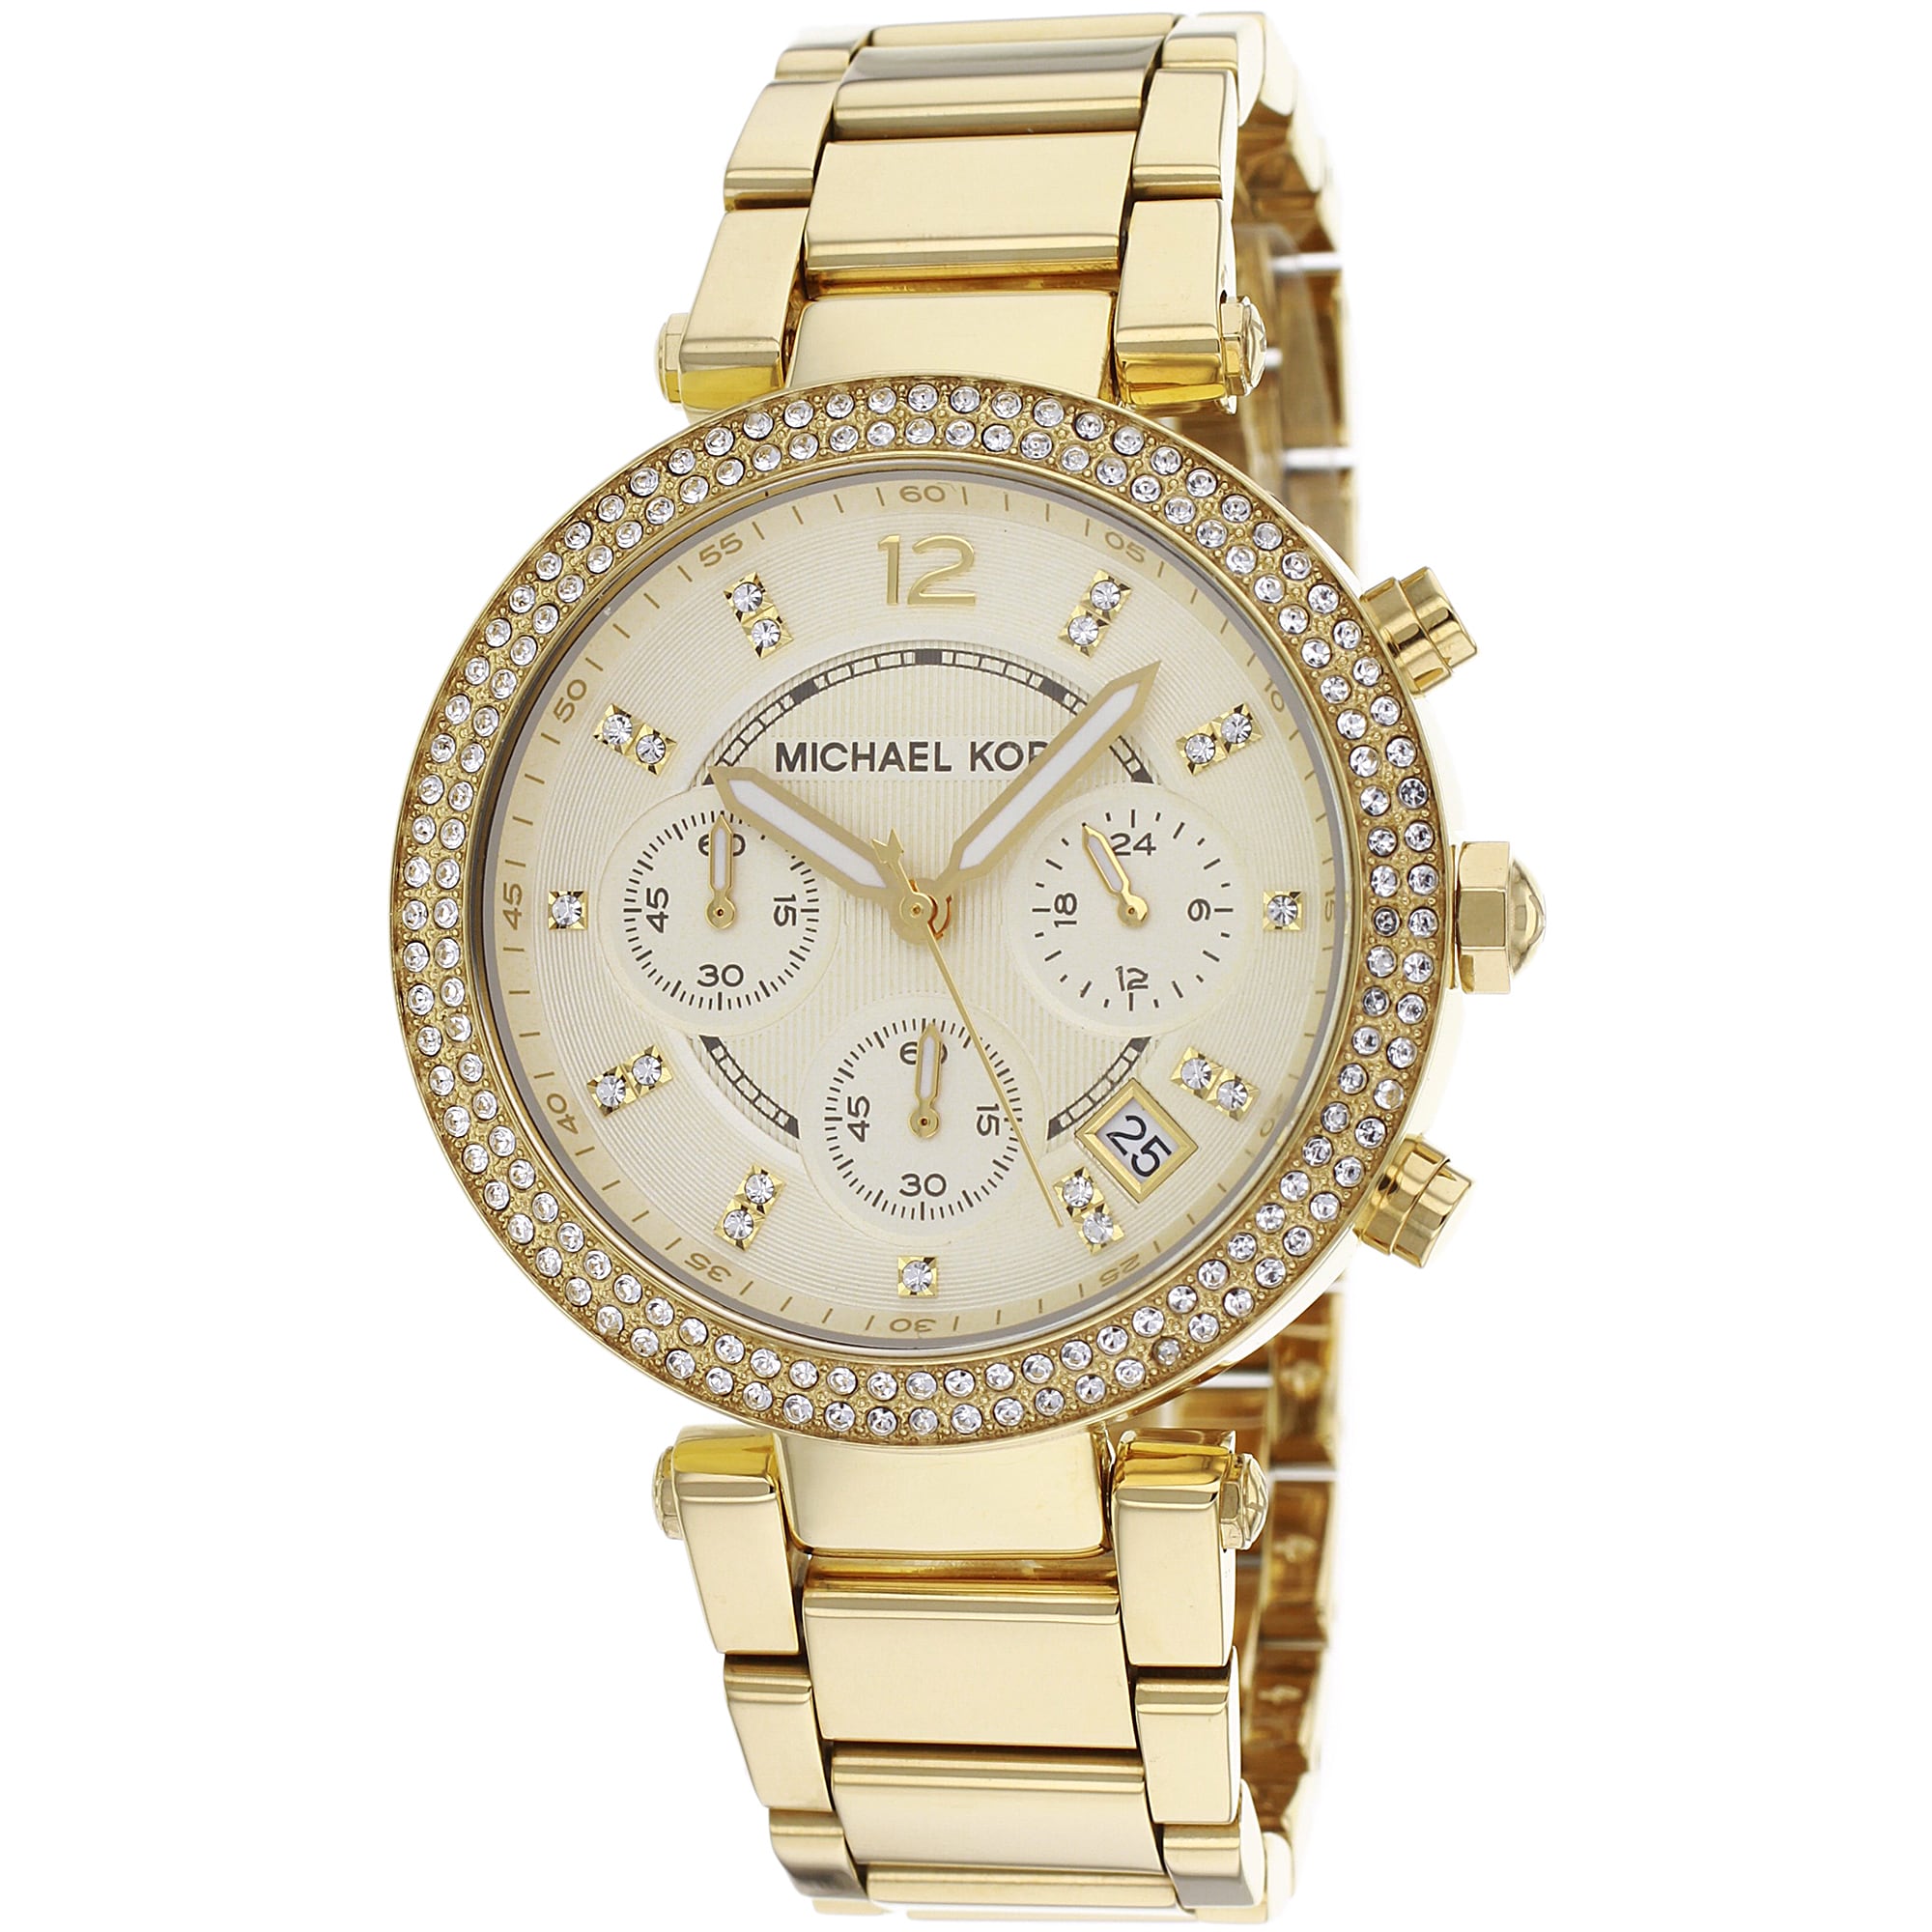 PEF Borgmester Afvige Michael Kors Women's MK5354 'Parker' Yellow Gold-tone Crystal Watch - Gold  - Overstock - 8700605